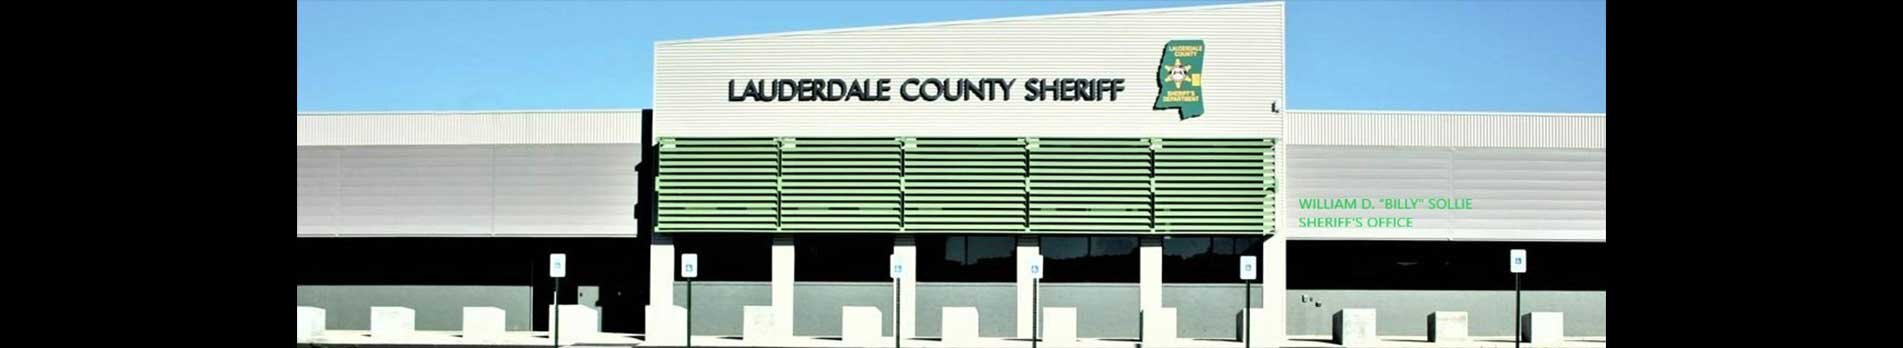 Lauderdale County Sheriff's Office Facility